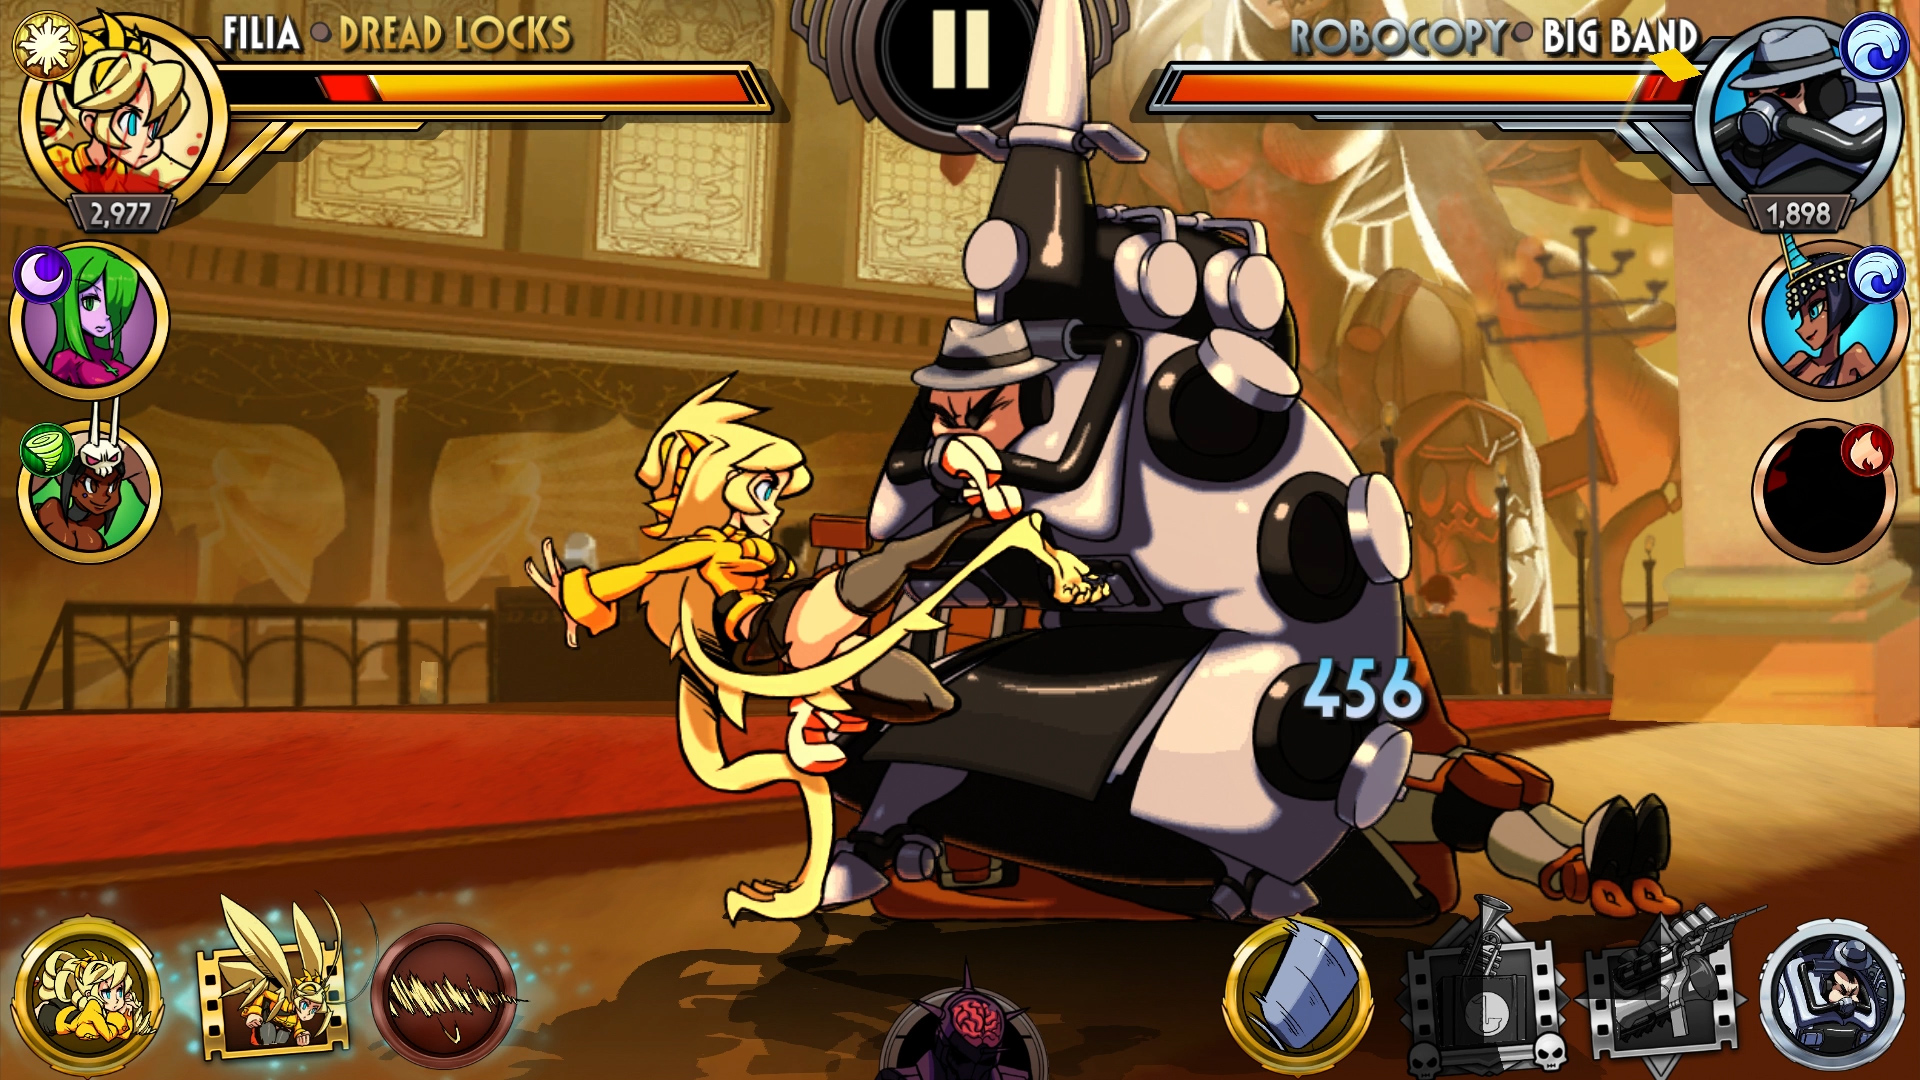 Mobile Version of 'Skullgirls' Fighting Game Hits the App Store